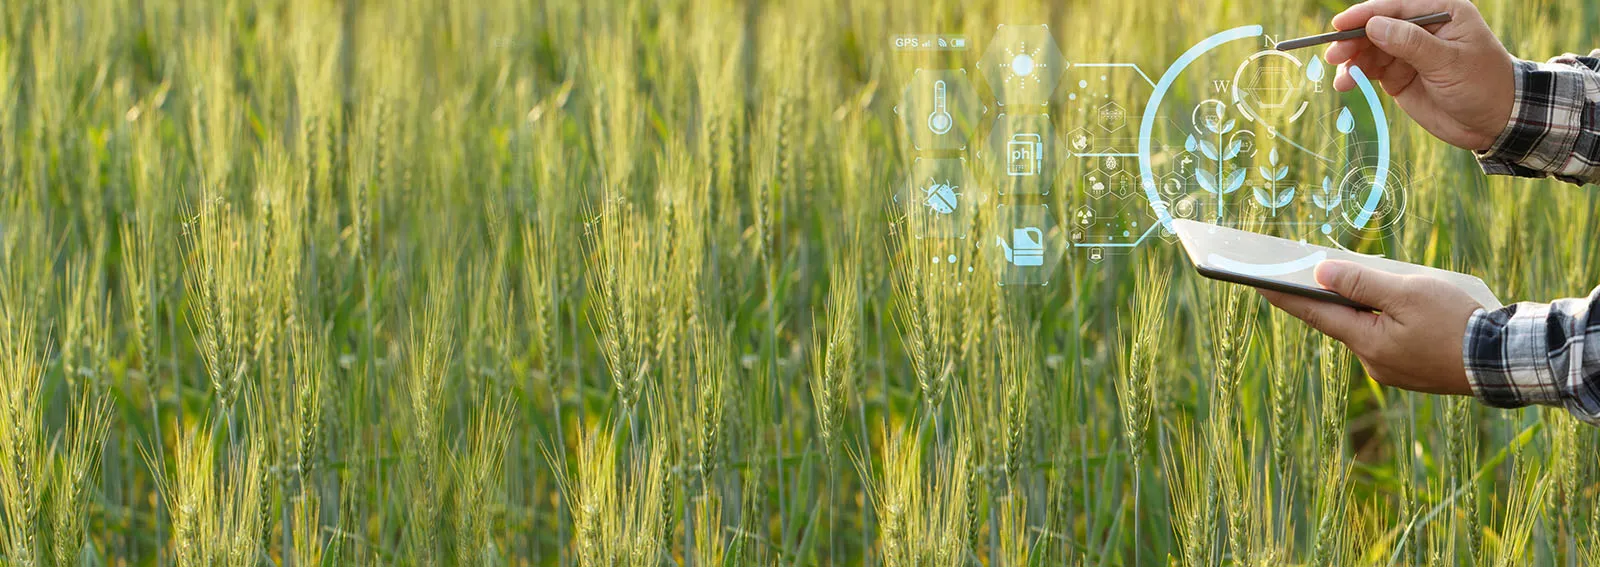 Farmer in a field with a holographic data visualization